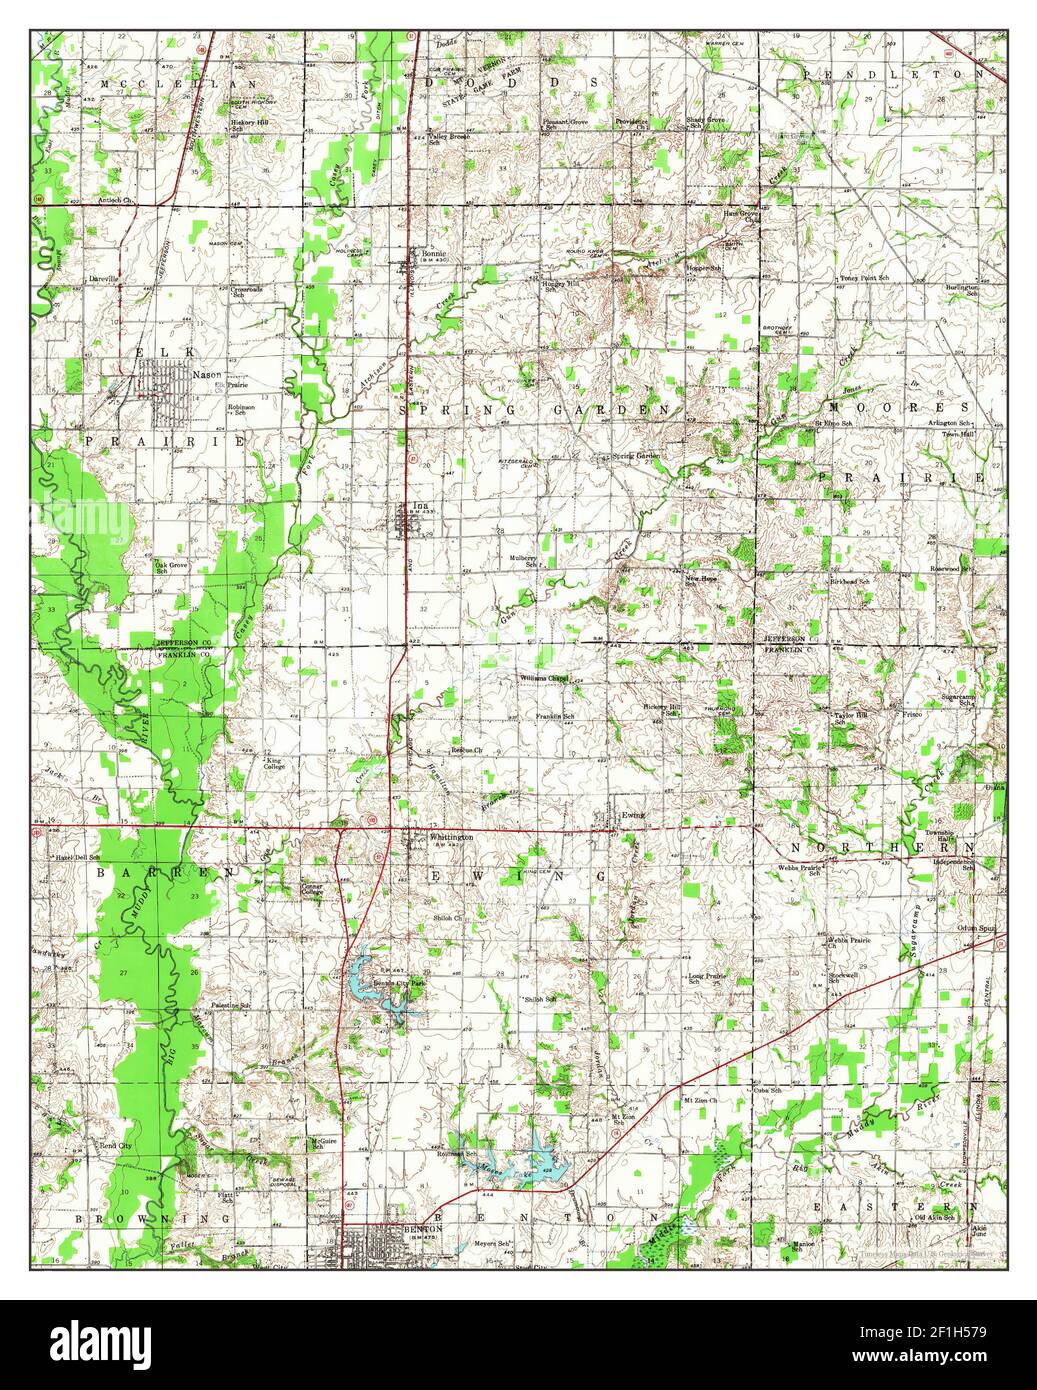 Ina, Illinois, map 1939, 1:62500, United States of America by Timeless Maps, data U.S. Geological Survey Stock Photo